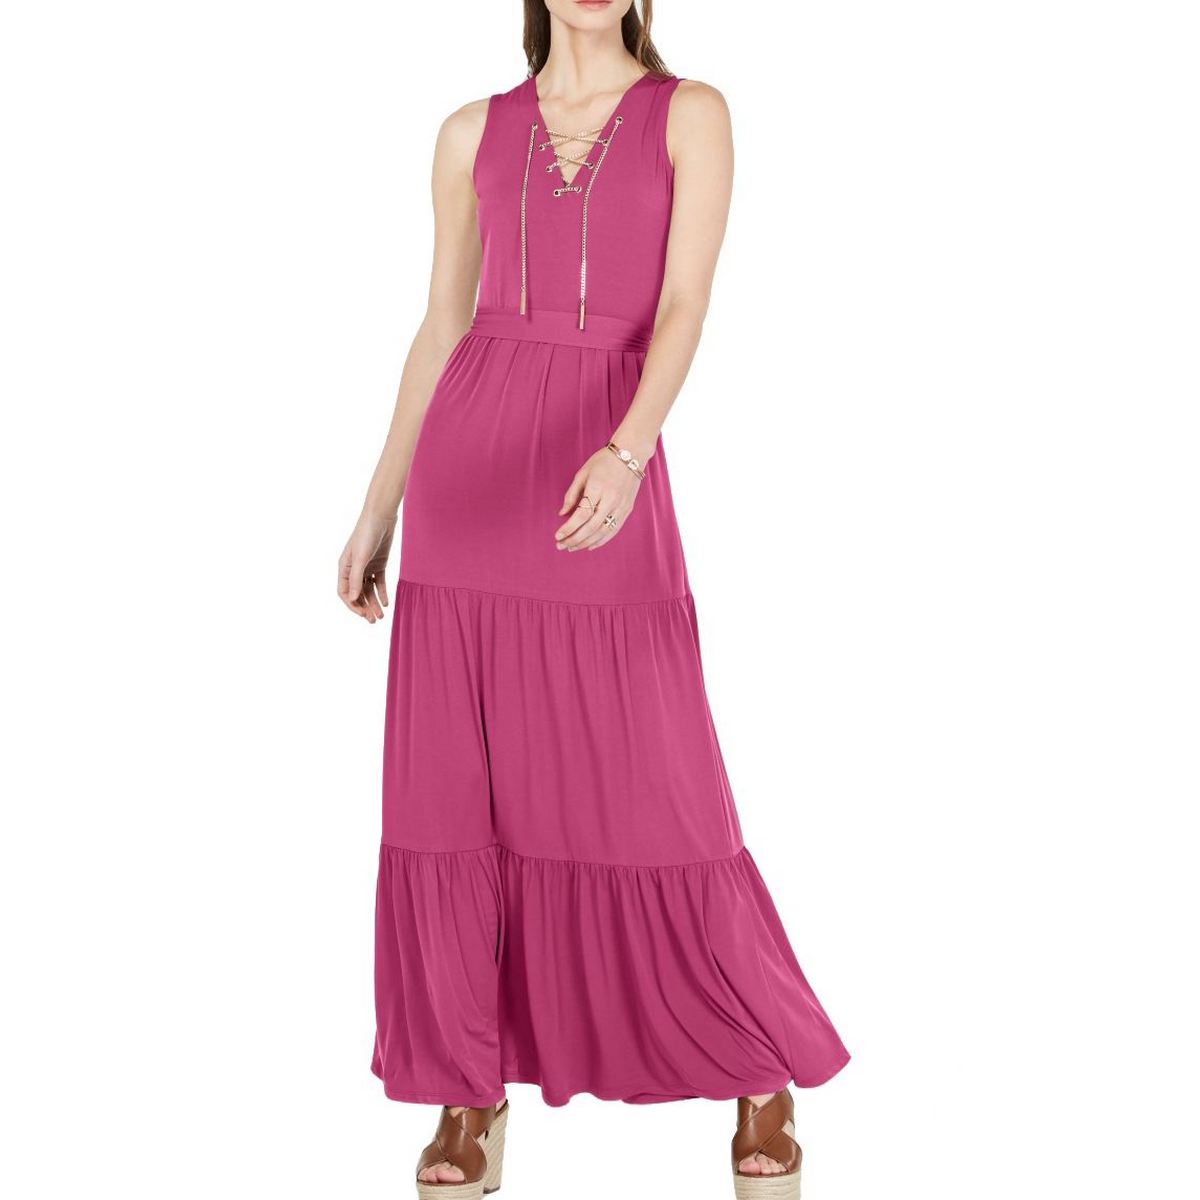 MICHAEL KORS NEW Women's Chain Lace-up Belted Maxi Dress TEDO $47.99 ...